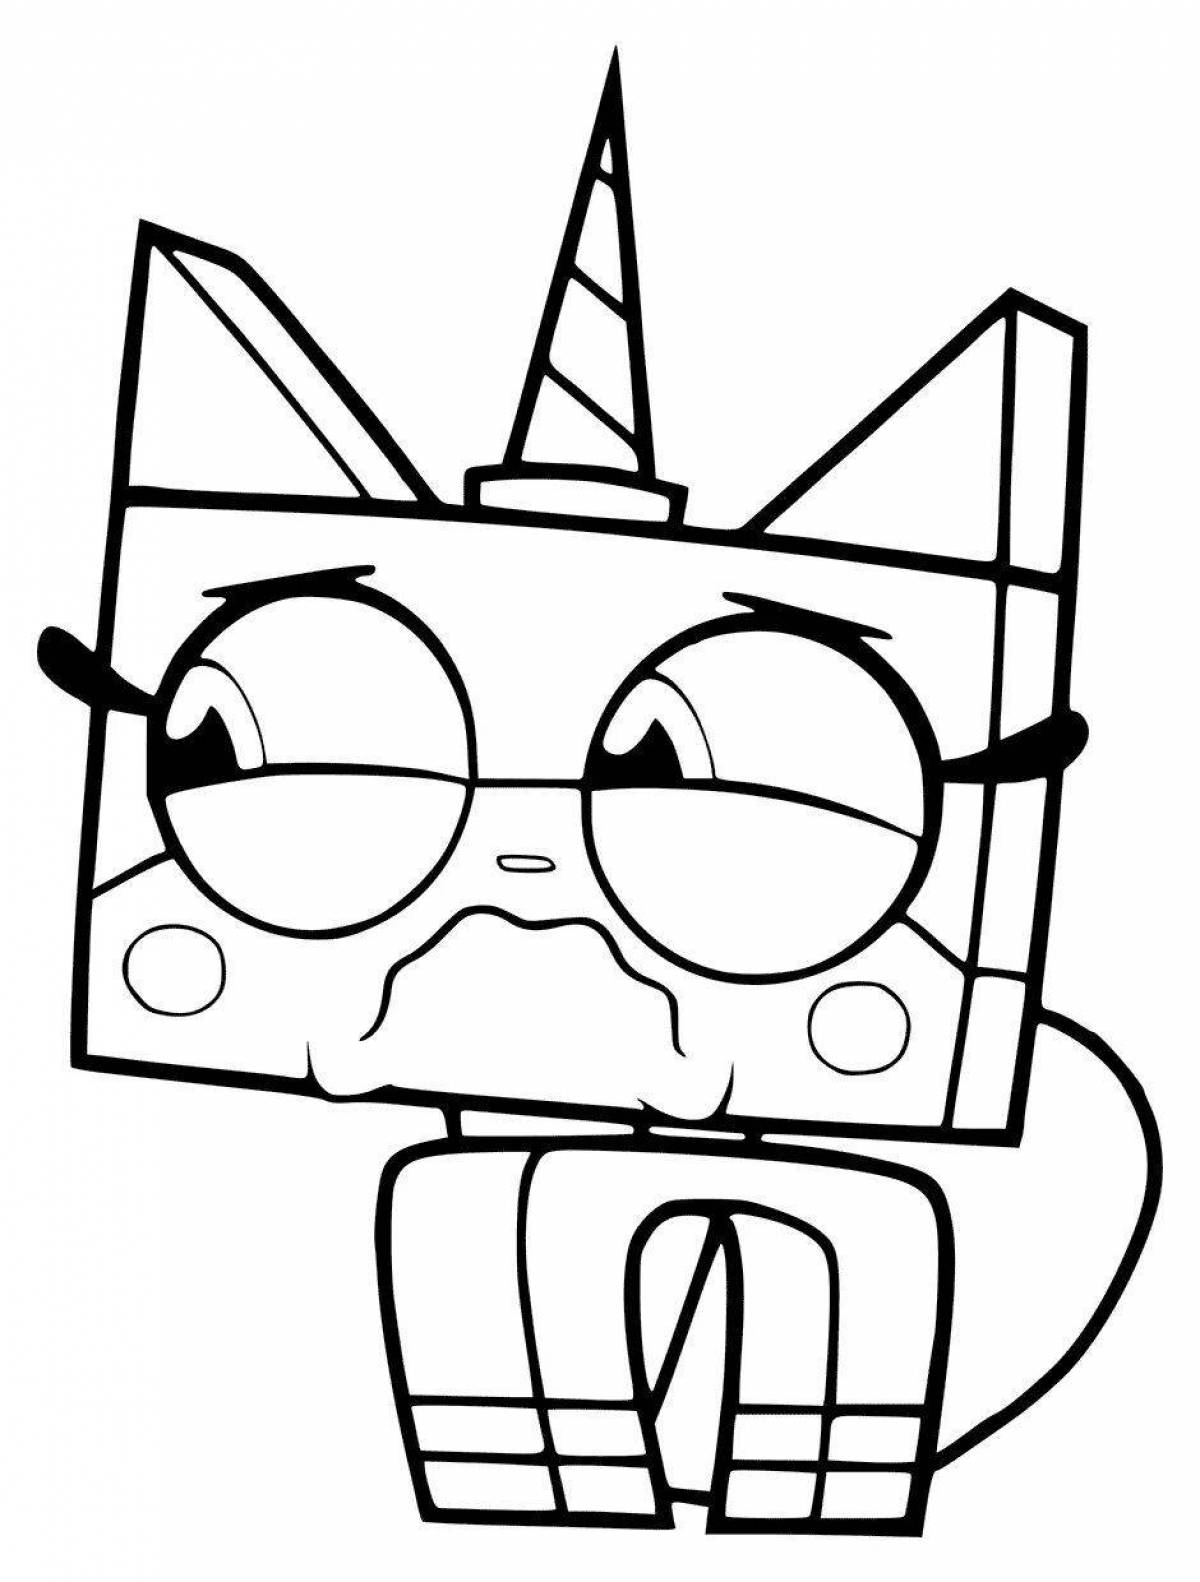 Color-blast unikitty lego coloring page